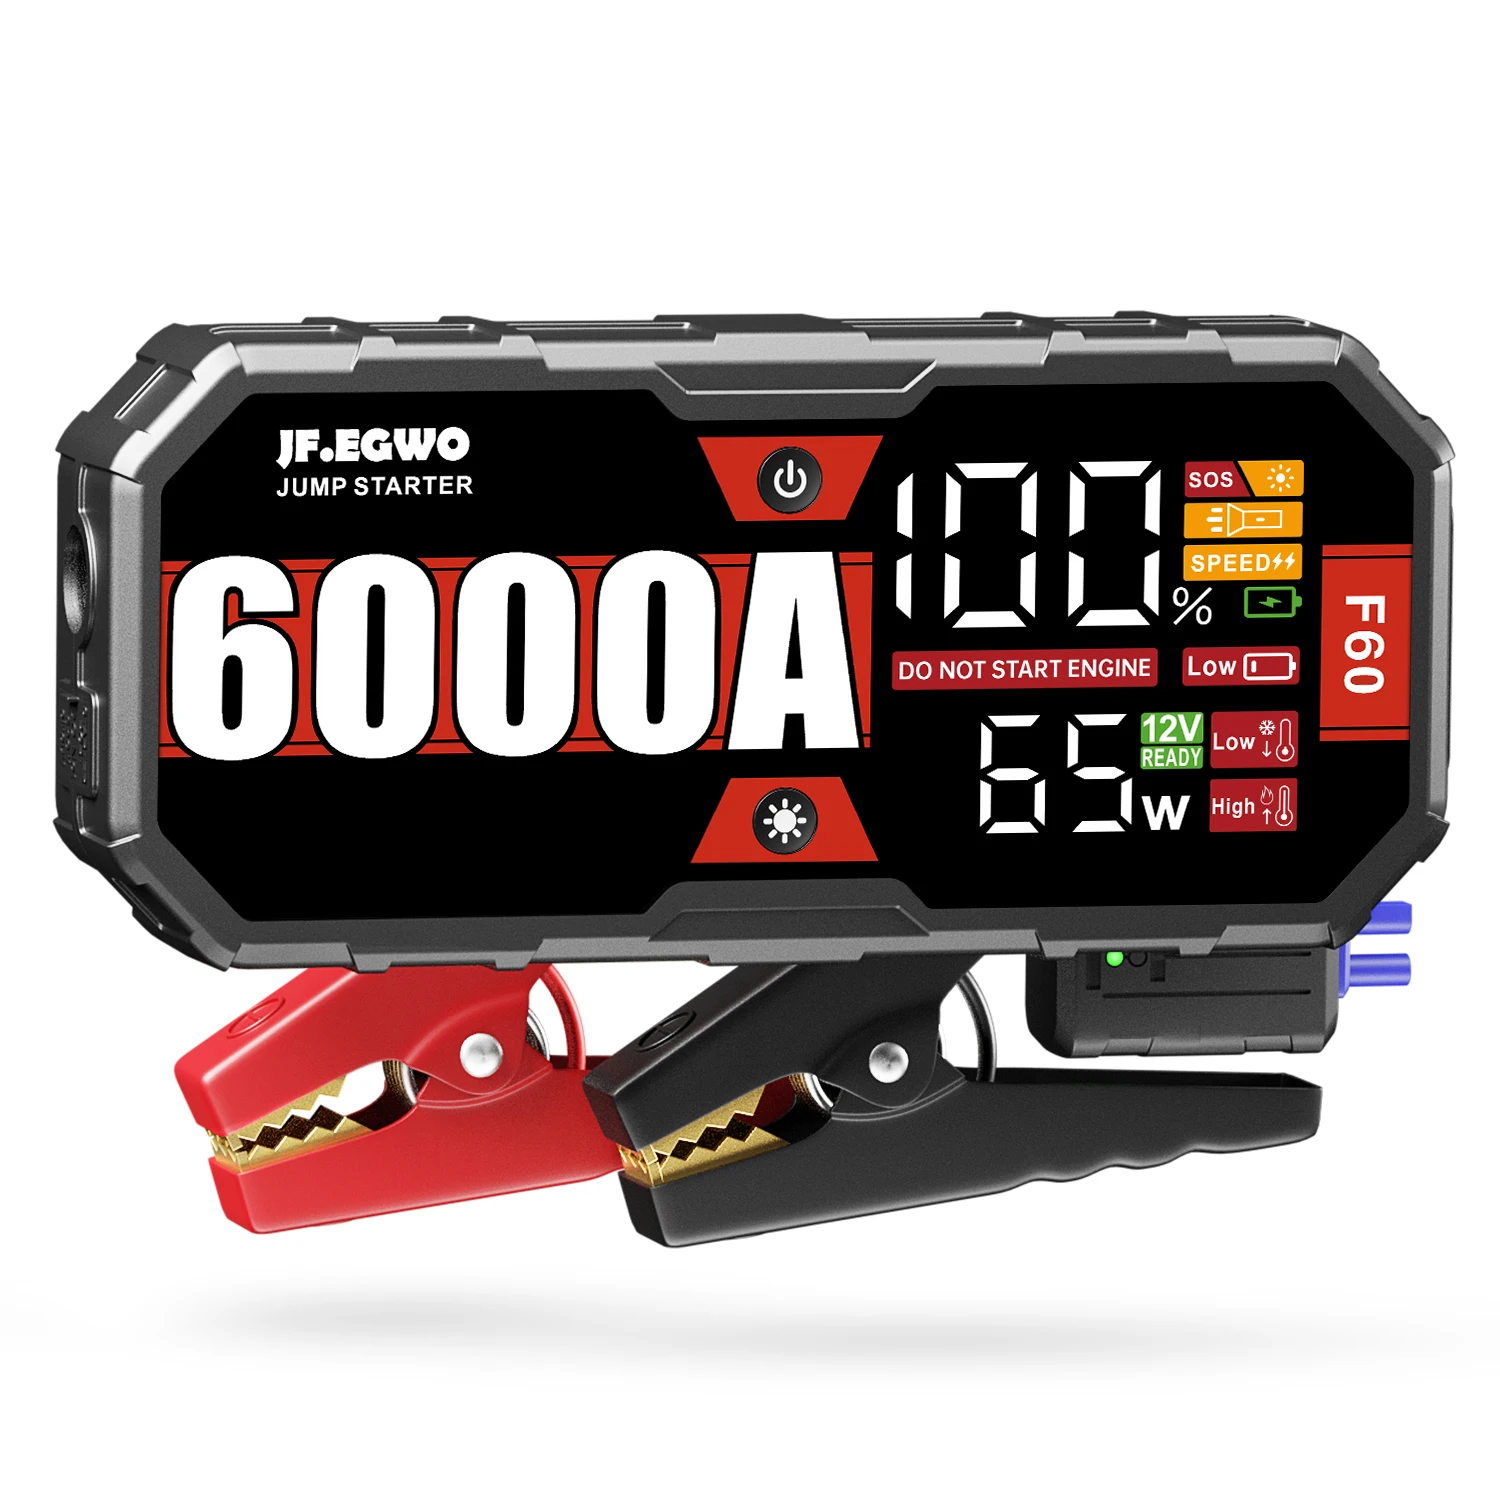 

Car jump starter buster 12V vehicle emergency battery auto booster battery starter with power bank powerful LED light